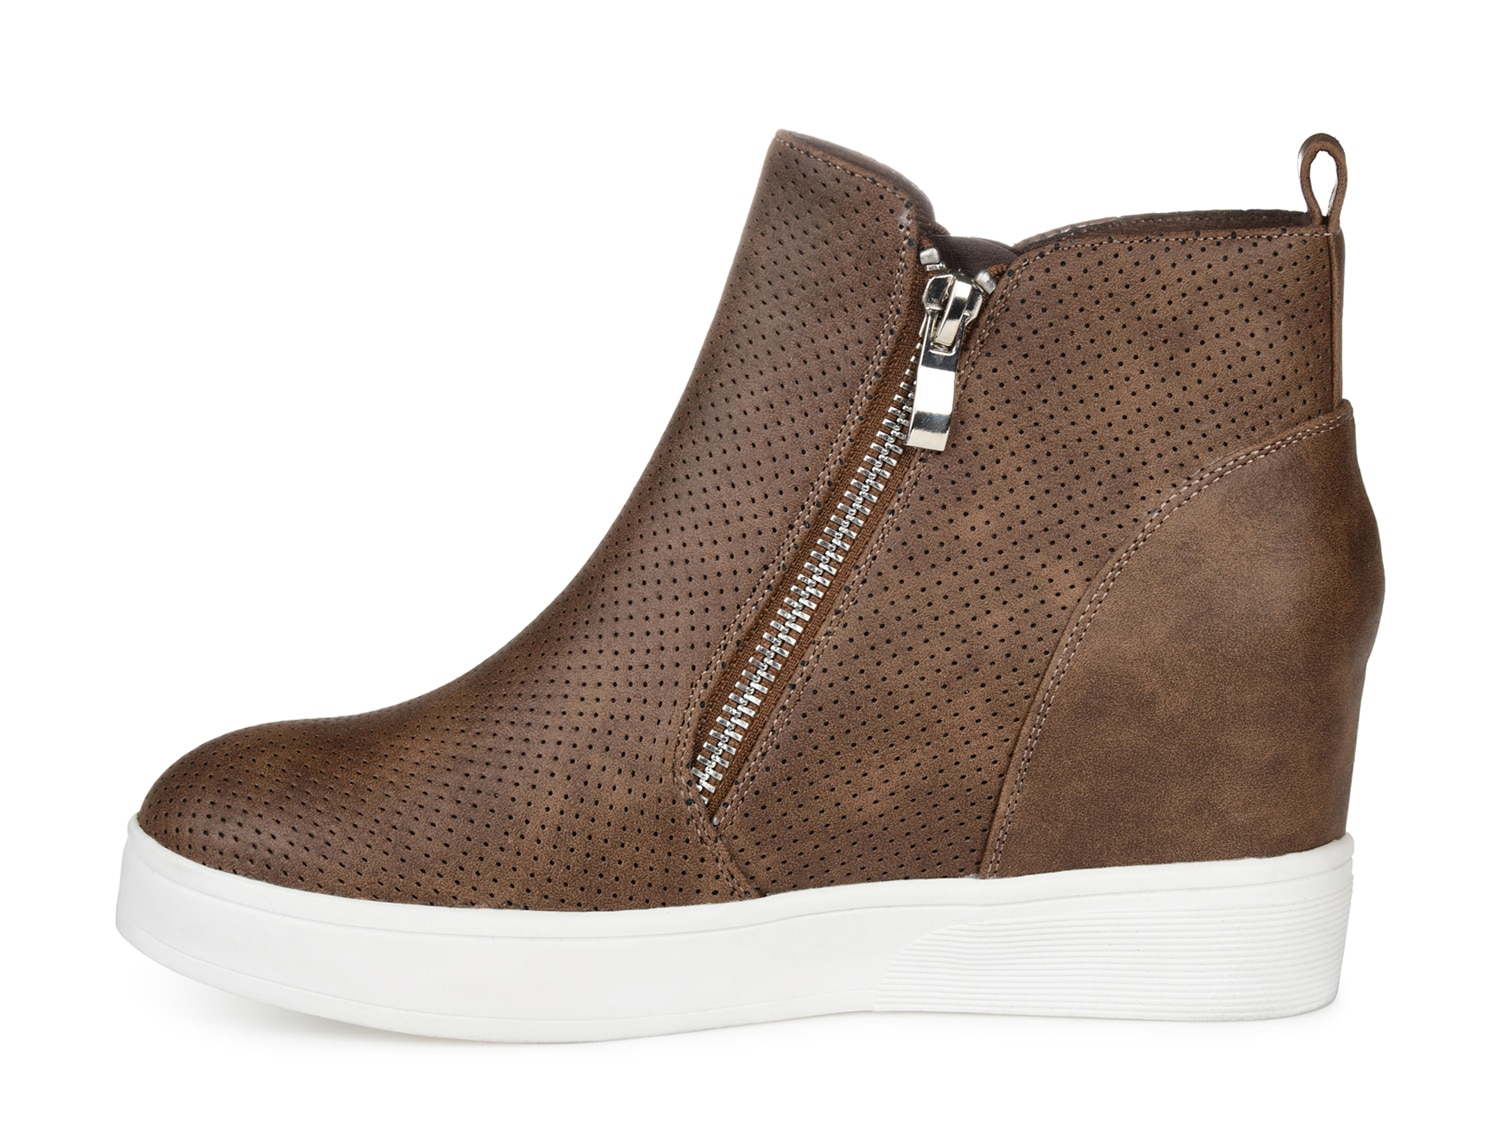 Journee Collection Pennelope High-Top Sneaker | DSW